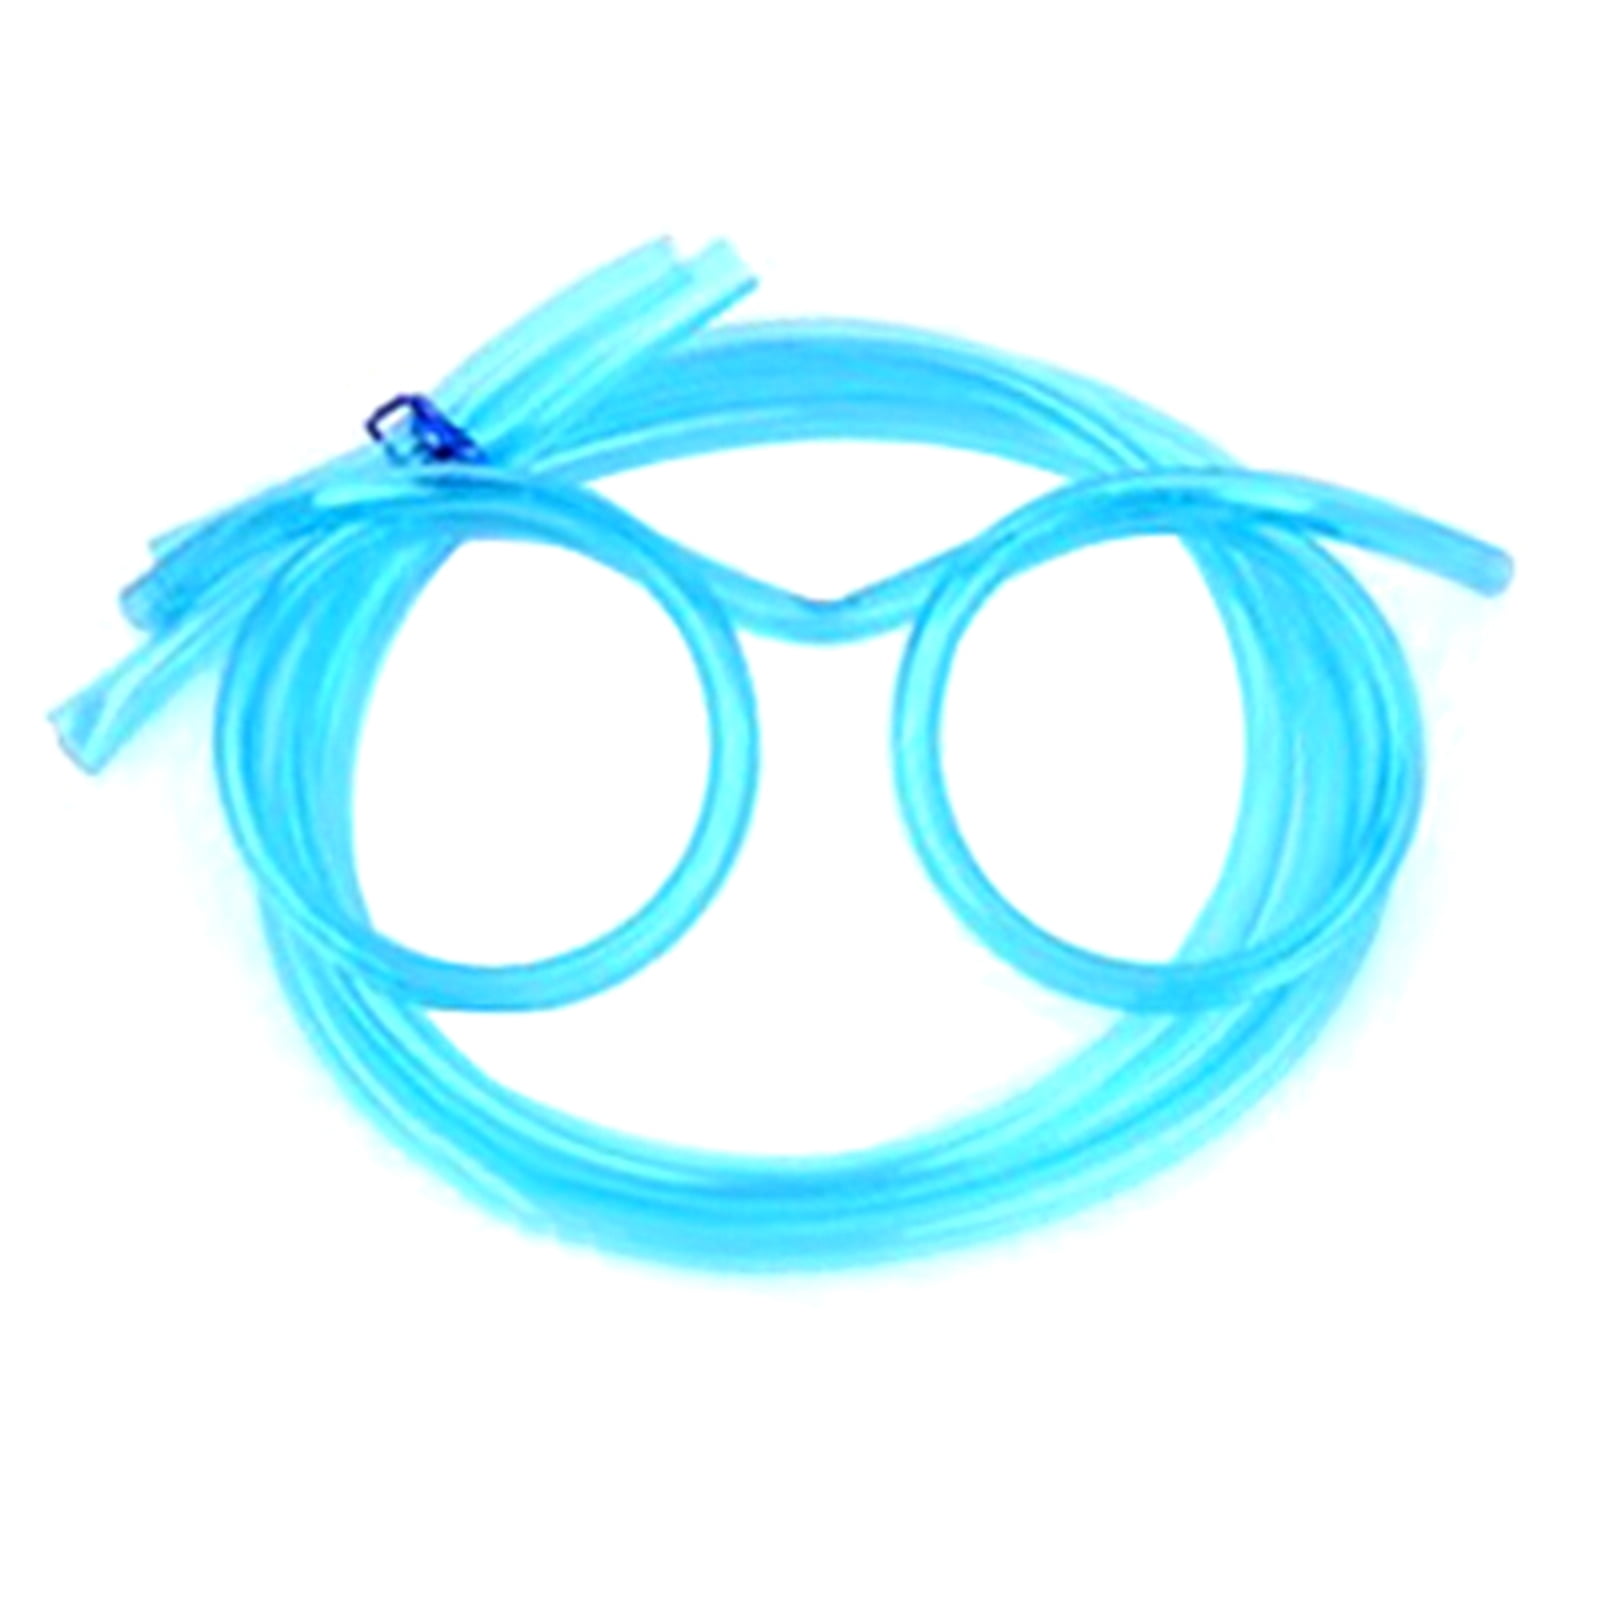  8 Pcs Drinking Straw Eyeglasses Plastic Silly Straw Eyeglasses  DIY Drinking Straw Glasses in Cute Heart Fun Loop Straws Crazy Eyeglasses  for Adults Kids Annual Meeting Parties Birthday (4 Colors) 